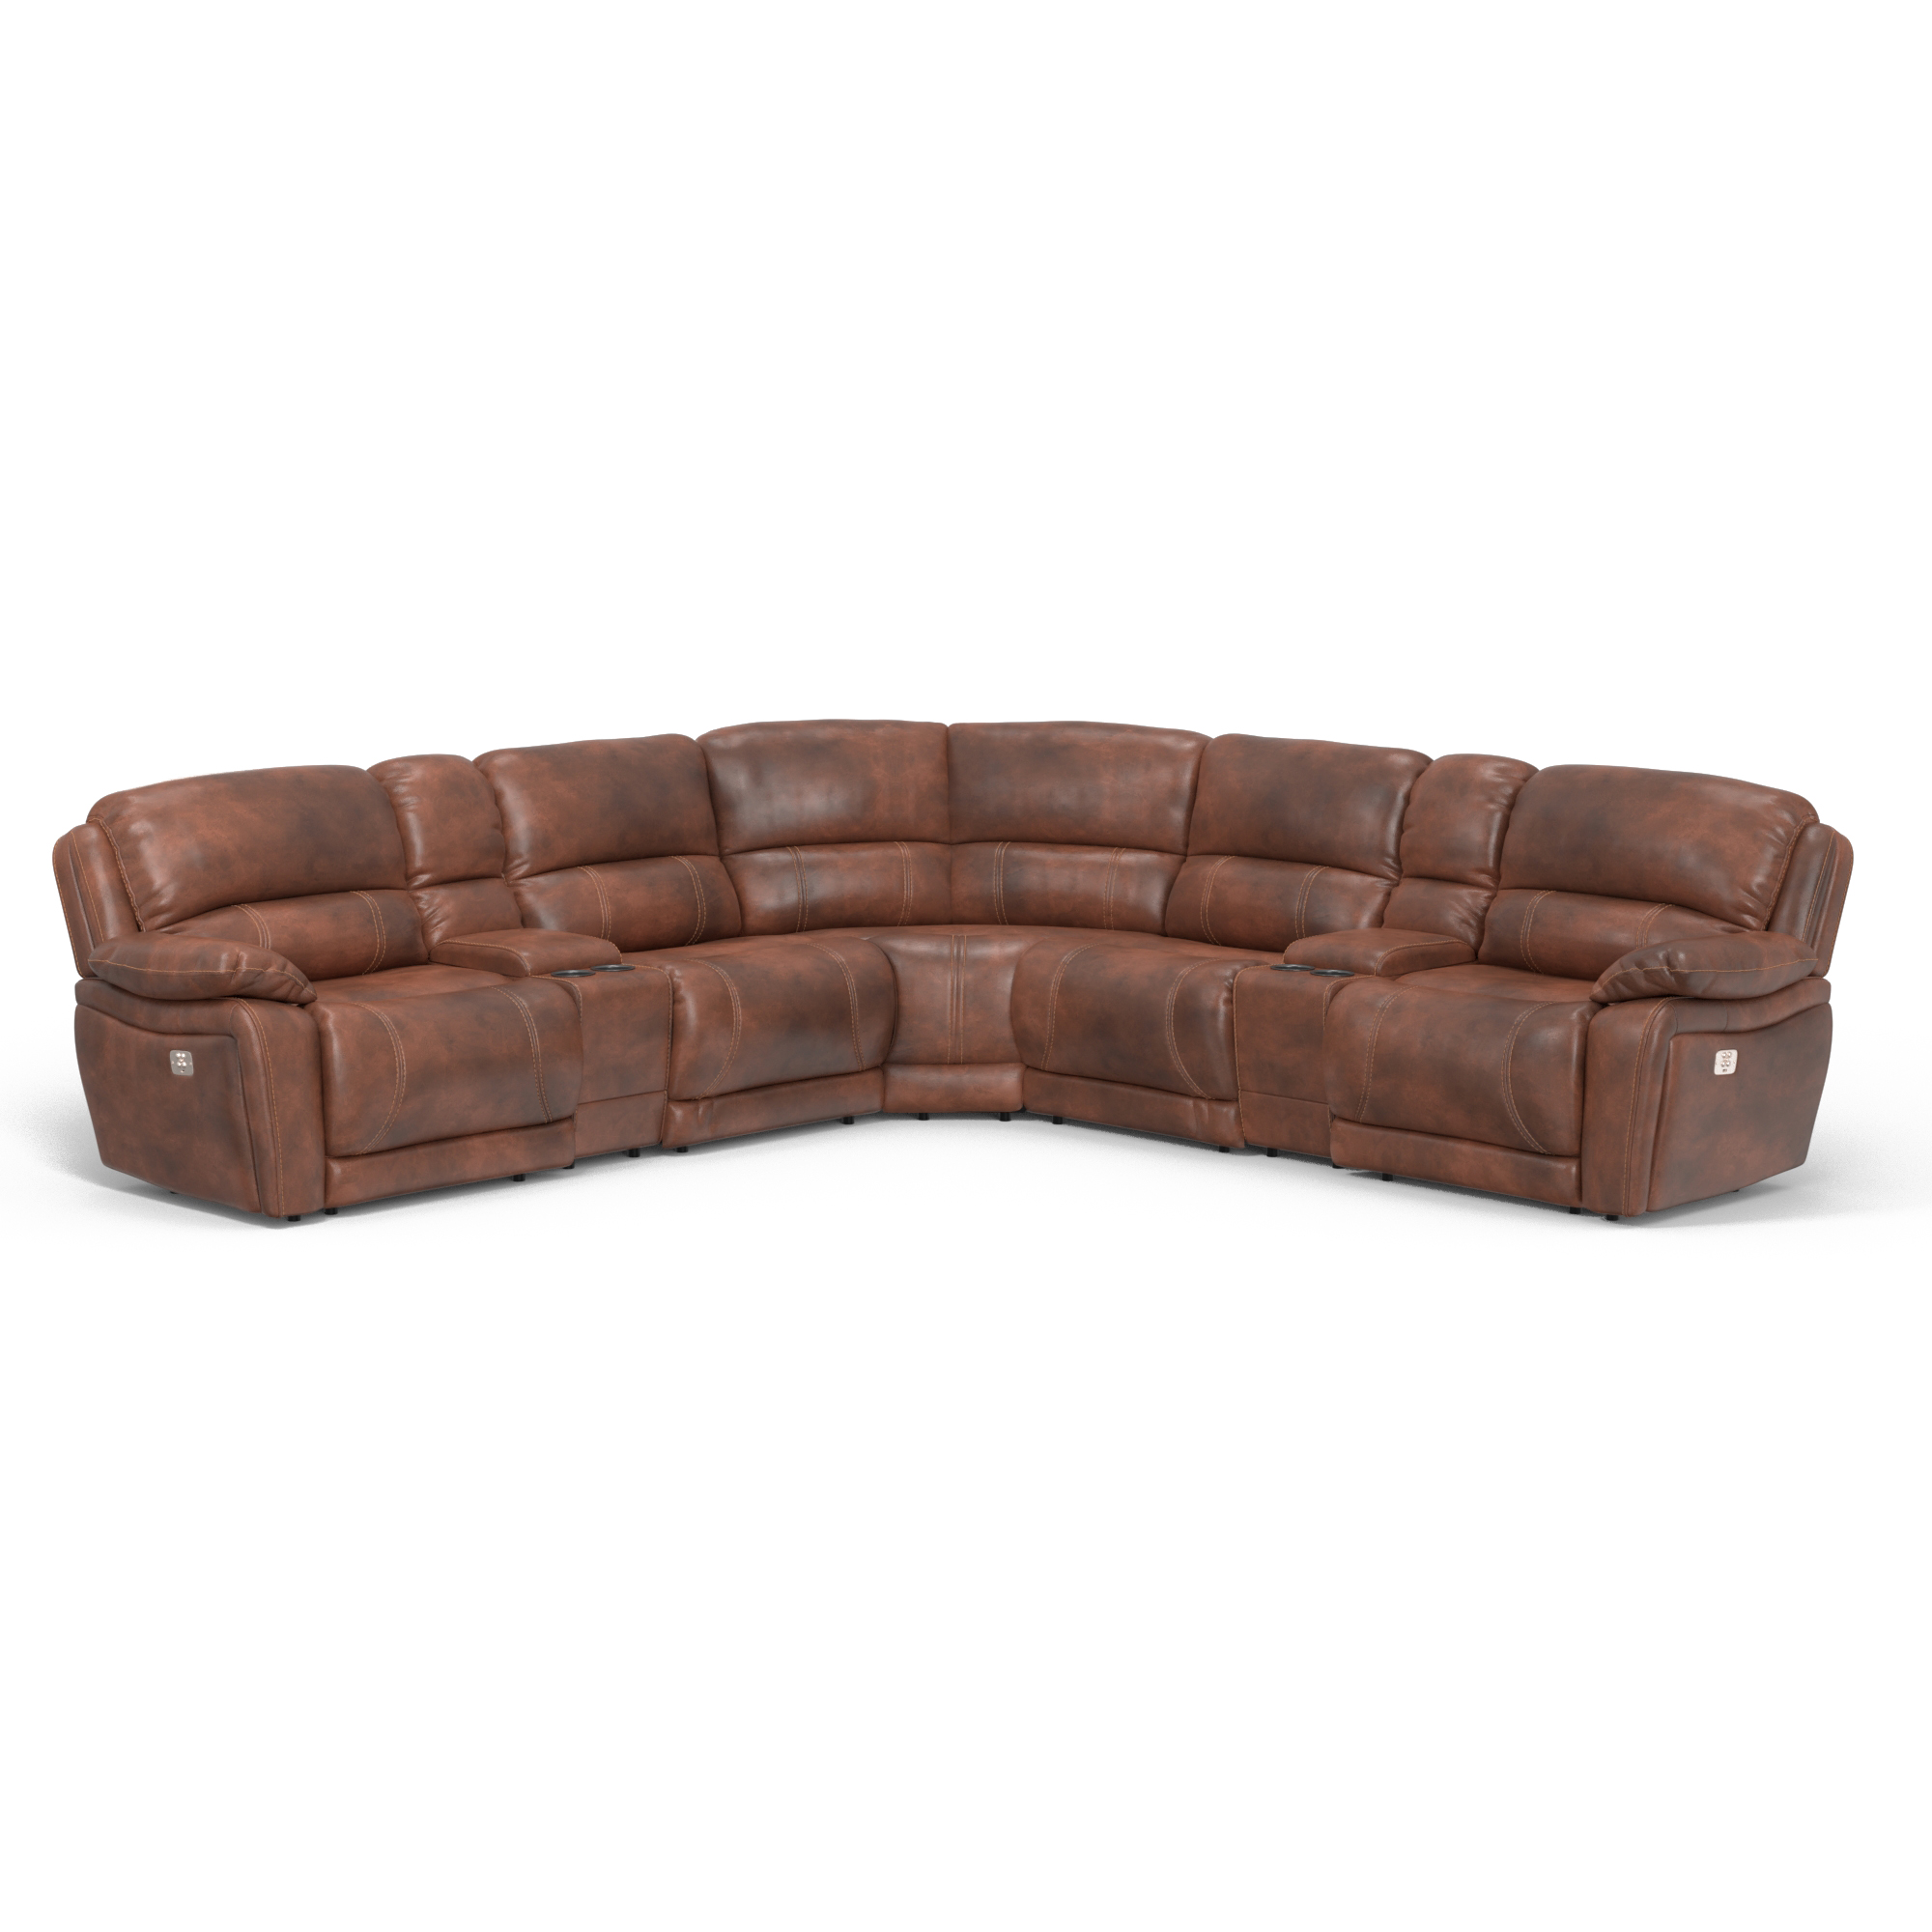 Cheers Lexington 7-Piece Leather Power Reclining Sectional with Power Headrests